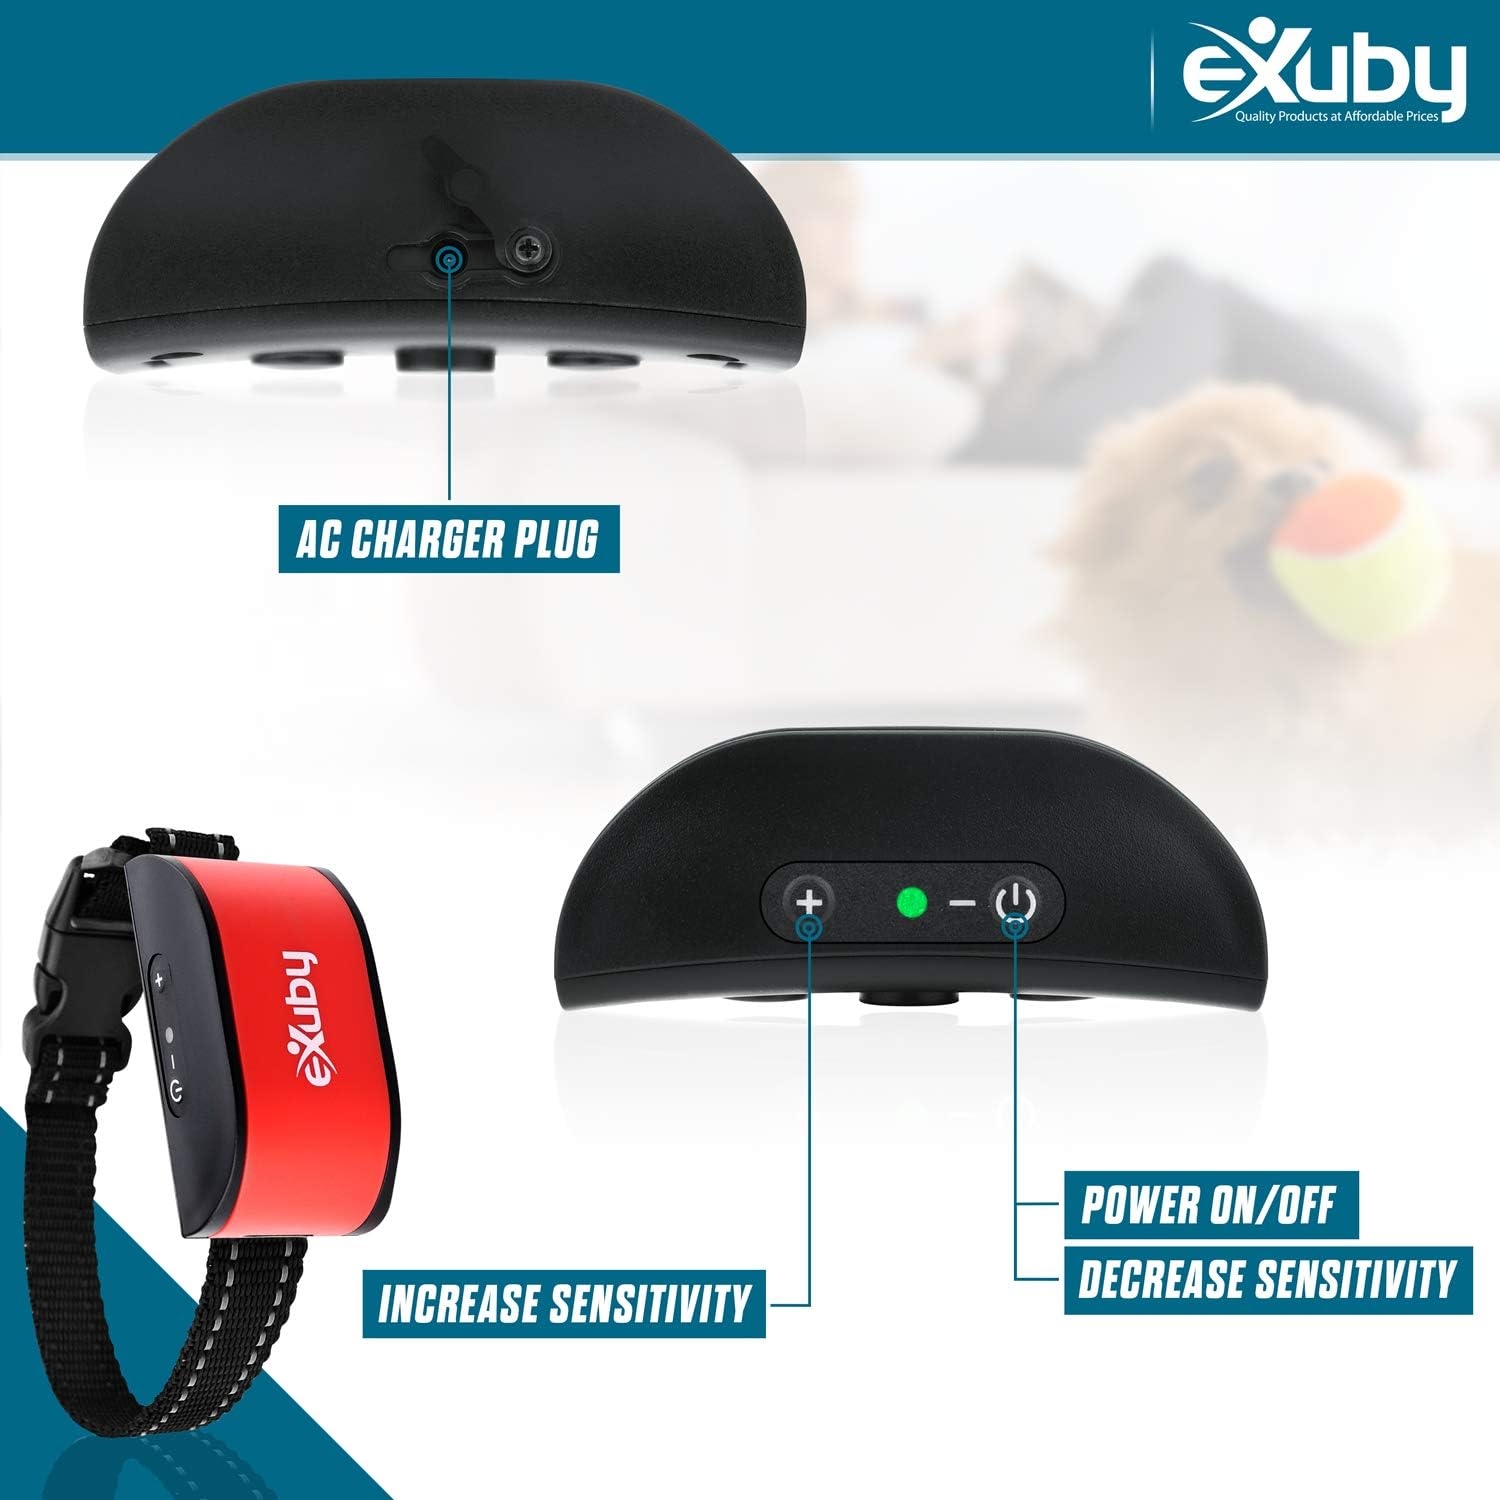 eXuby Friendly Dog Bark Collar w/ Built-in Microphone for Small Dogs - Humane Sound & Vibrations (No Shock) - Only Activates When Your Dog Barks - Advanced Chipset Auto Adjusts Vibration - No Prongs